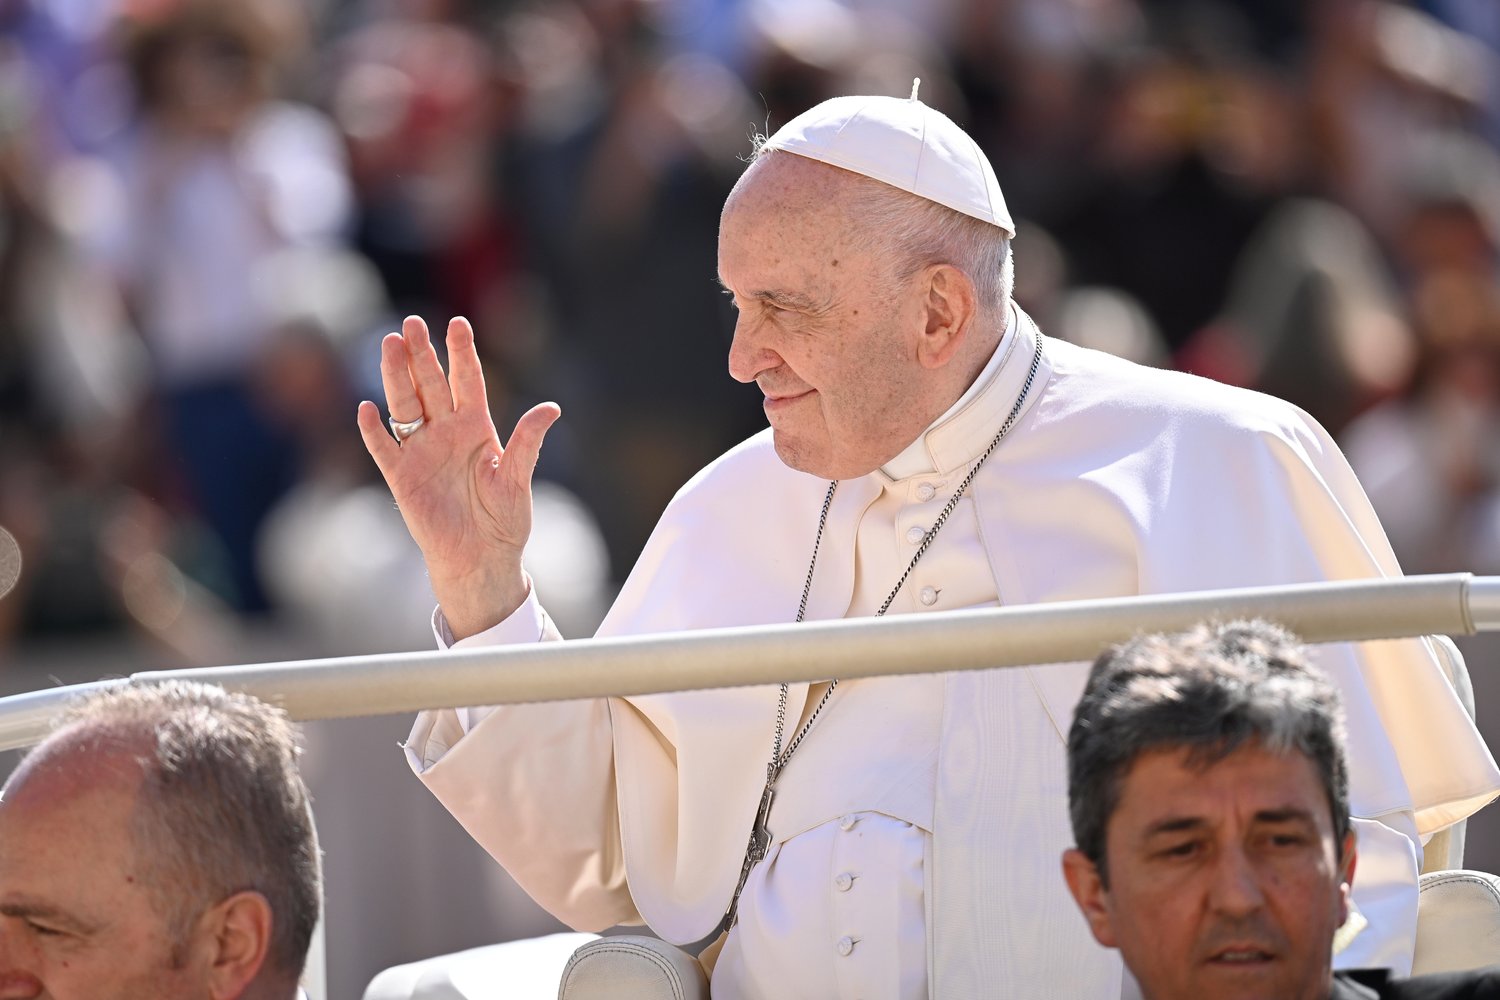 Pope Francis waves to the crowd gathered in St. Peter’s Square at the Vatican May 11 for his weekly general audience.